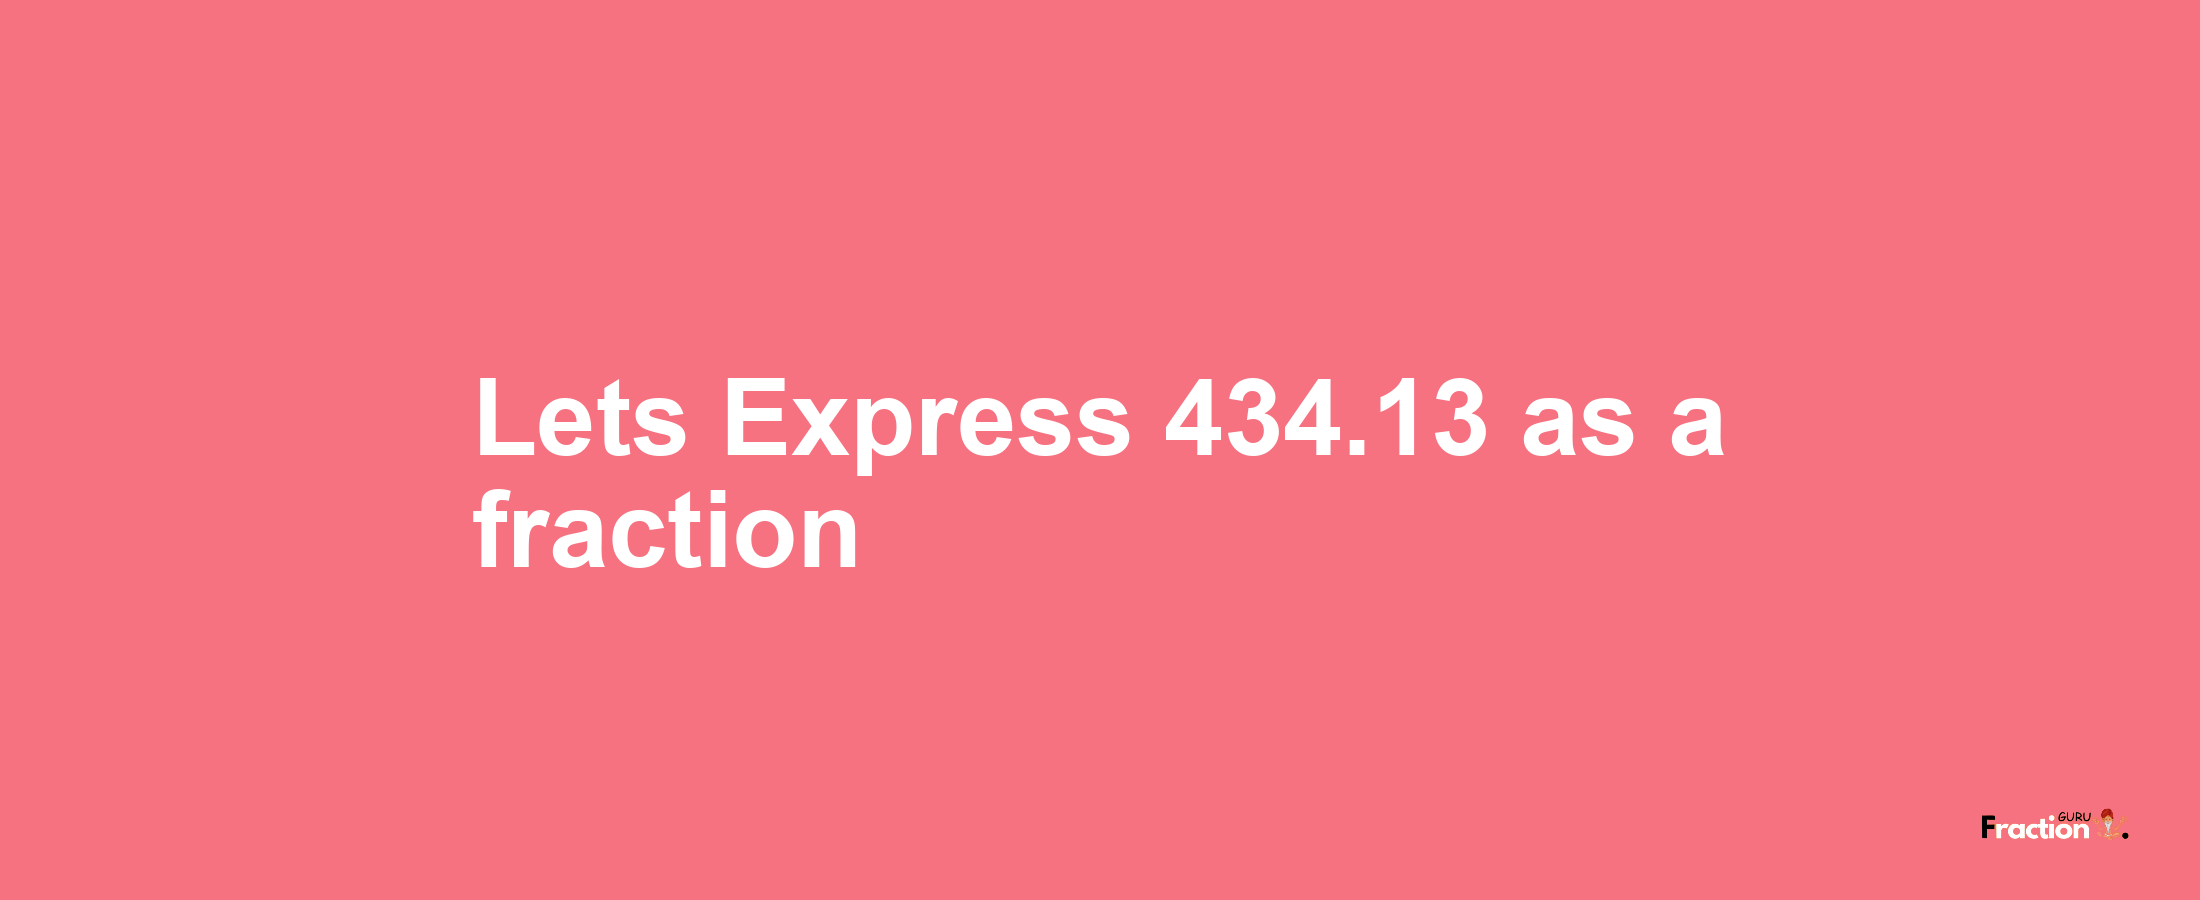 Lets Express 434.13 as afraction